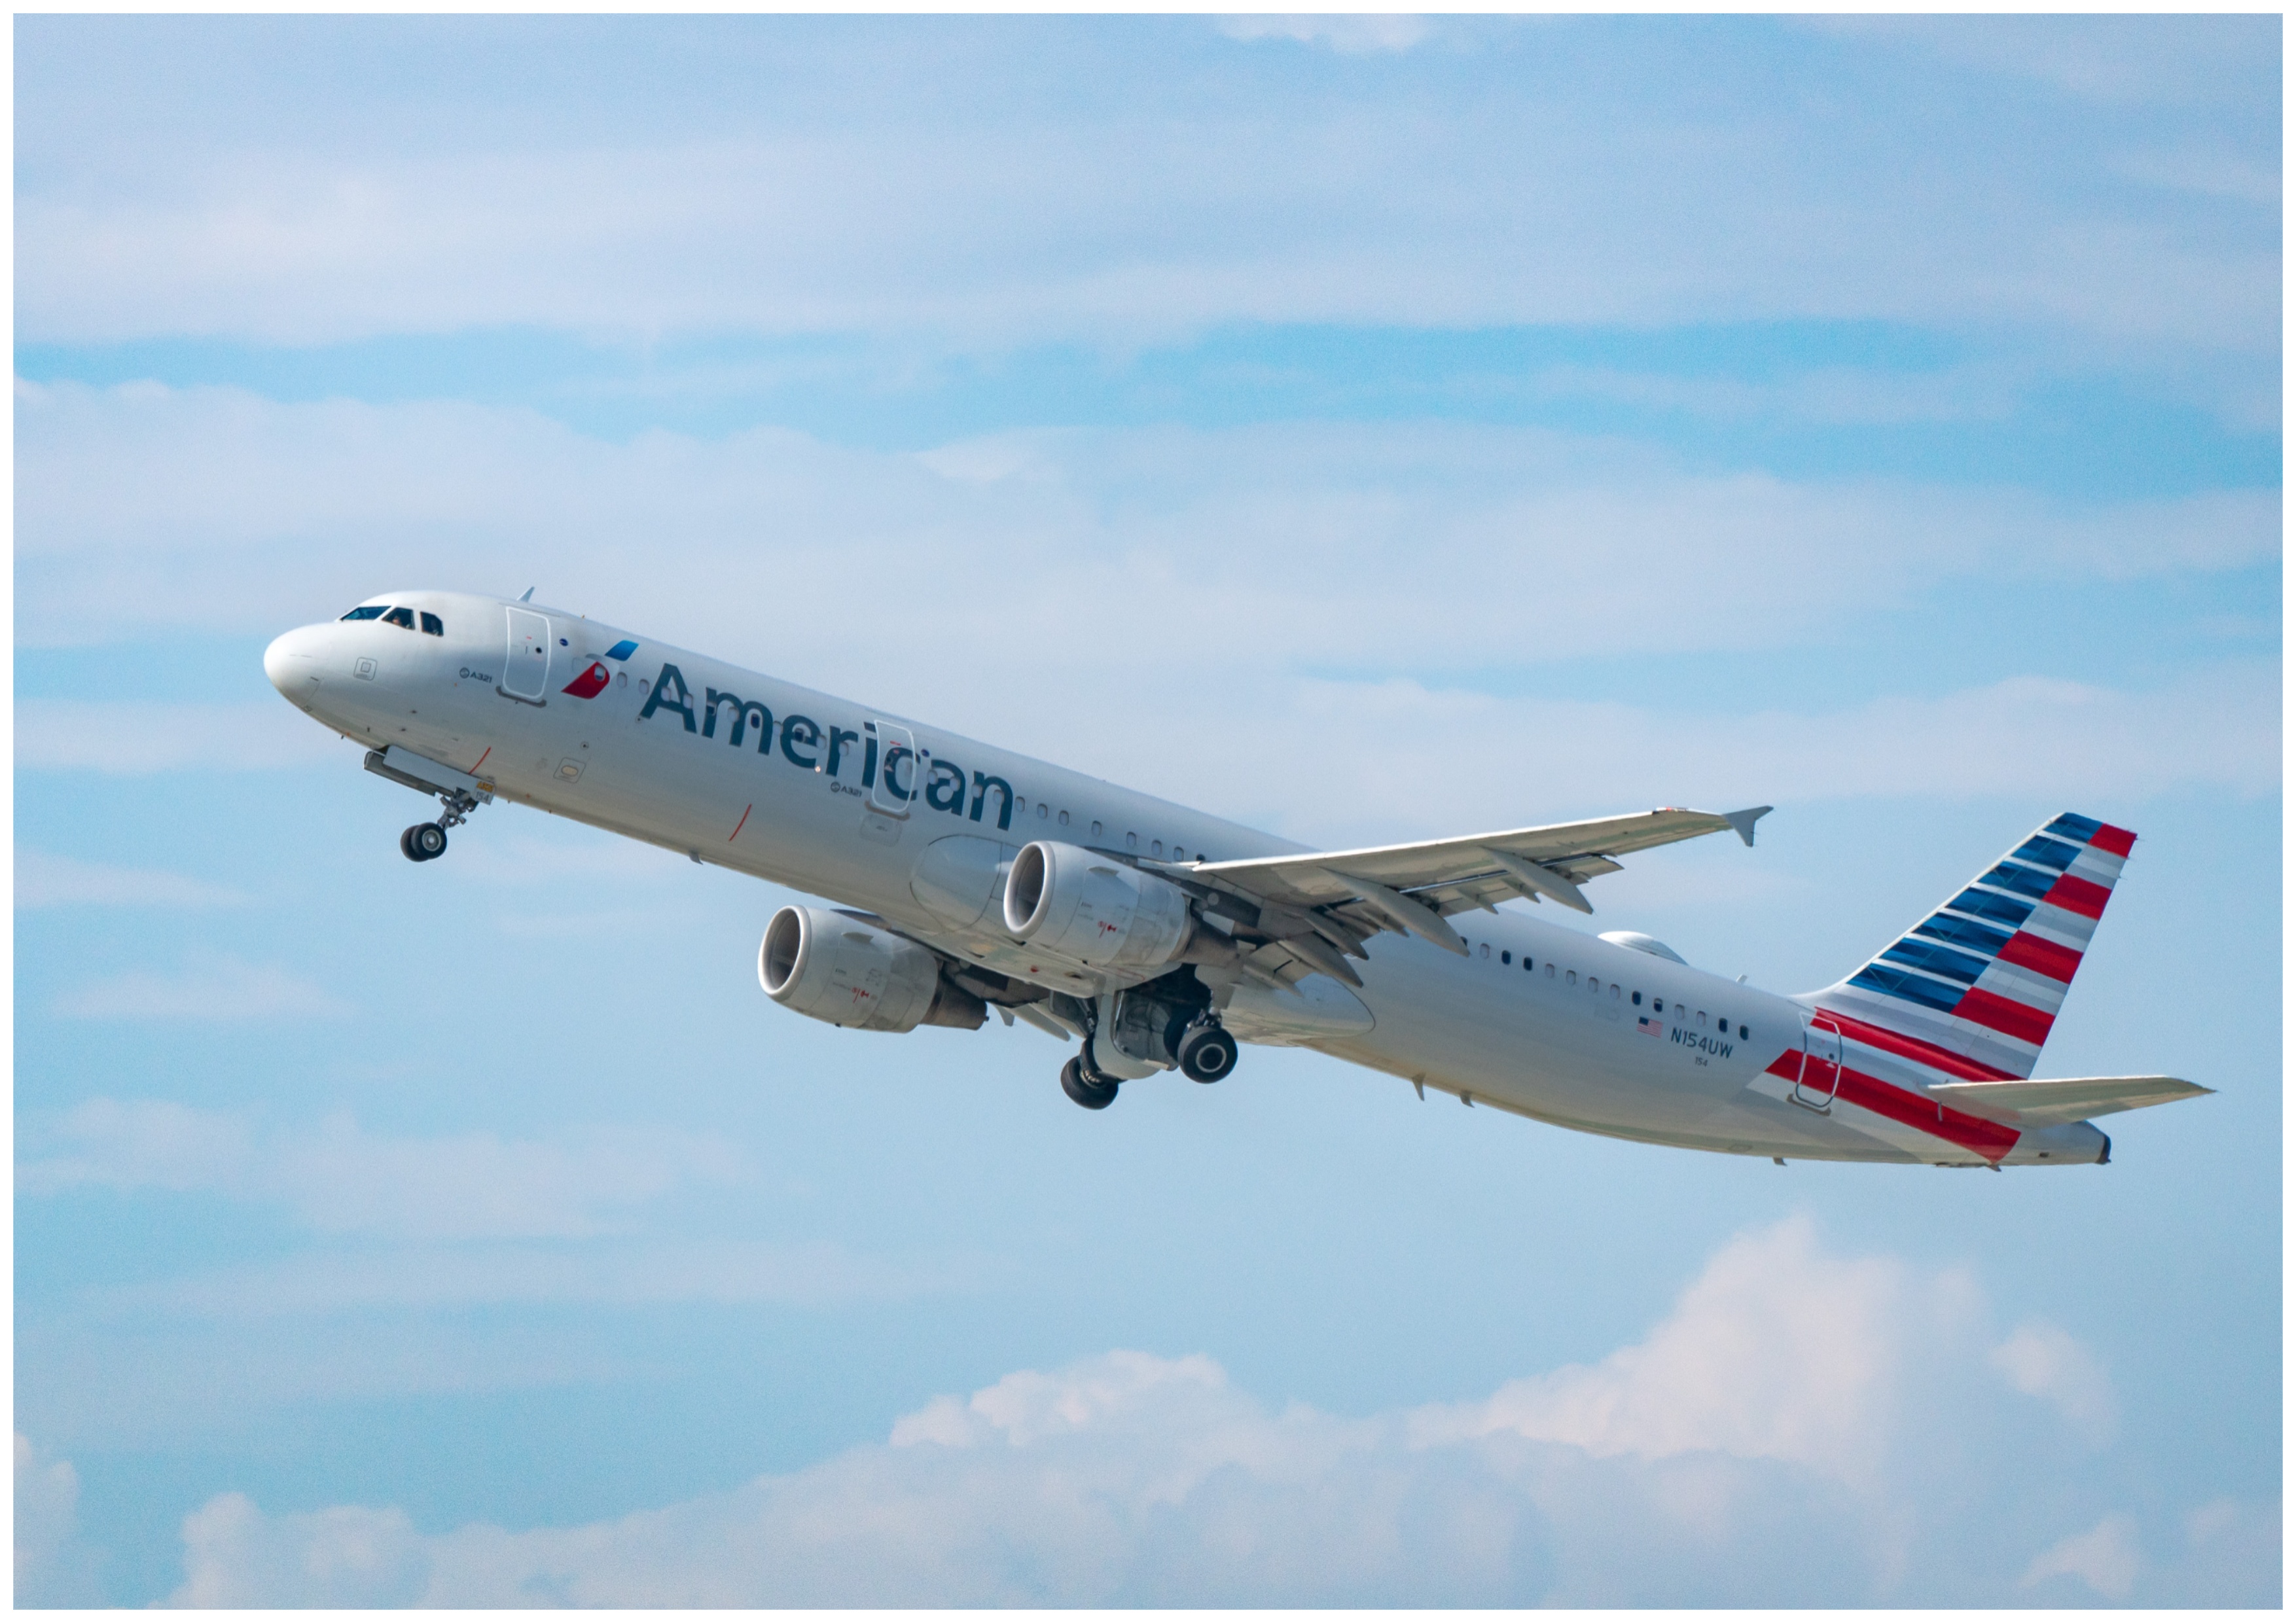 Teenage Girl Finds Hidden Camera on American Airlines Plane Toilet